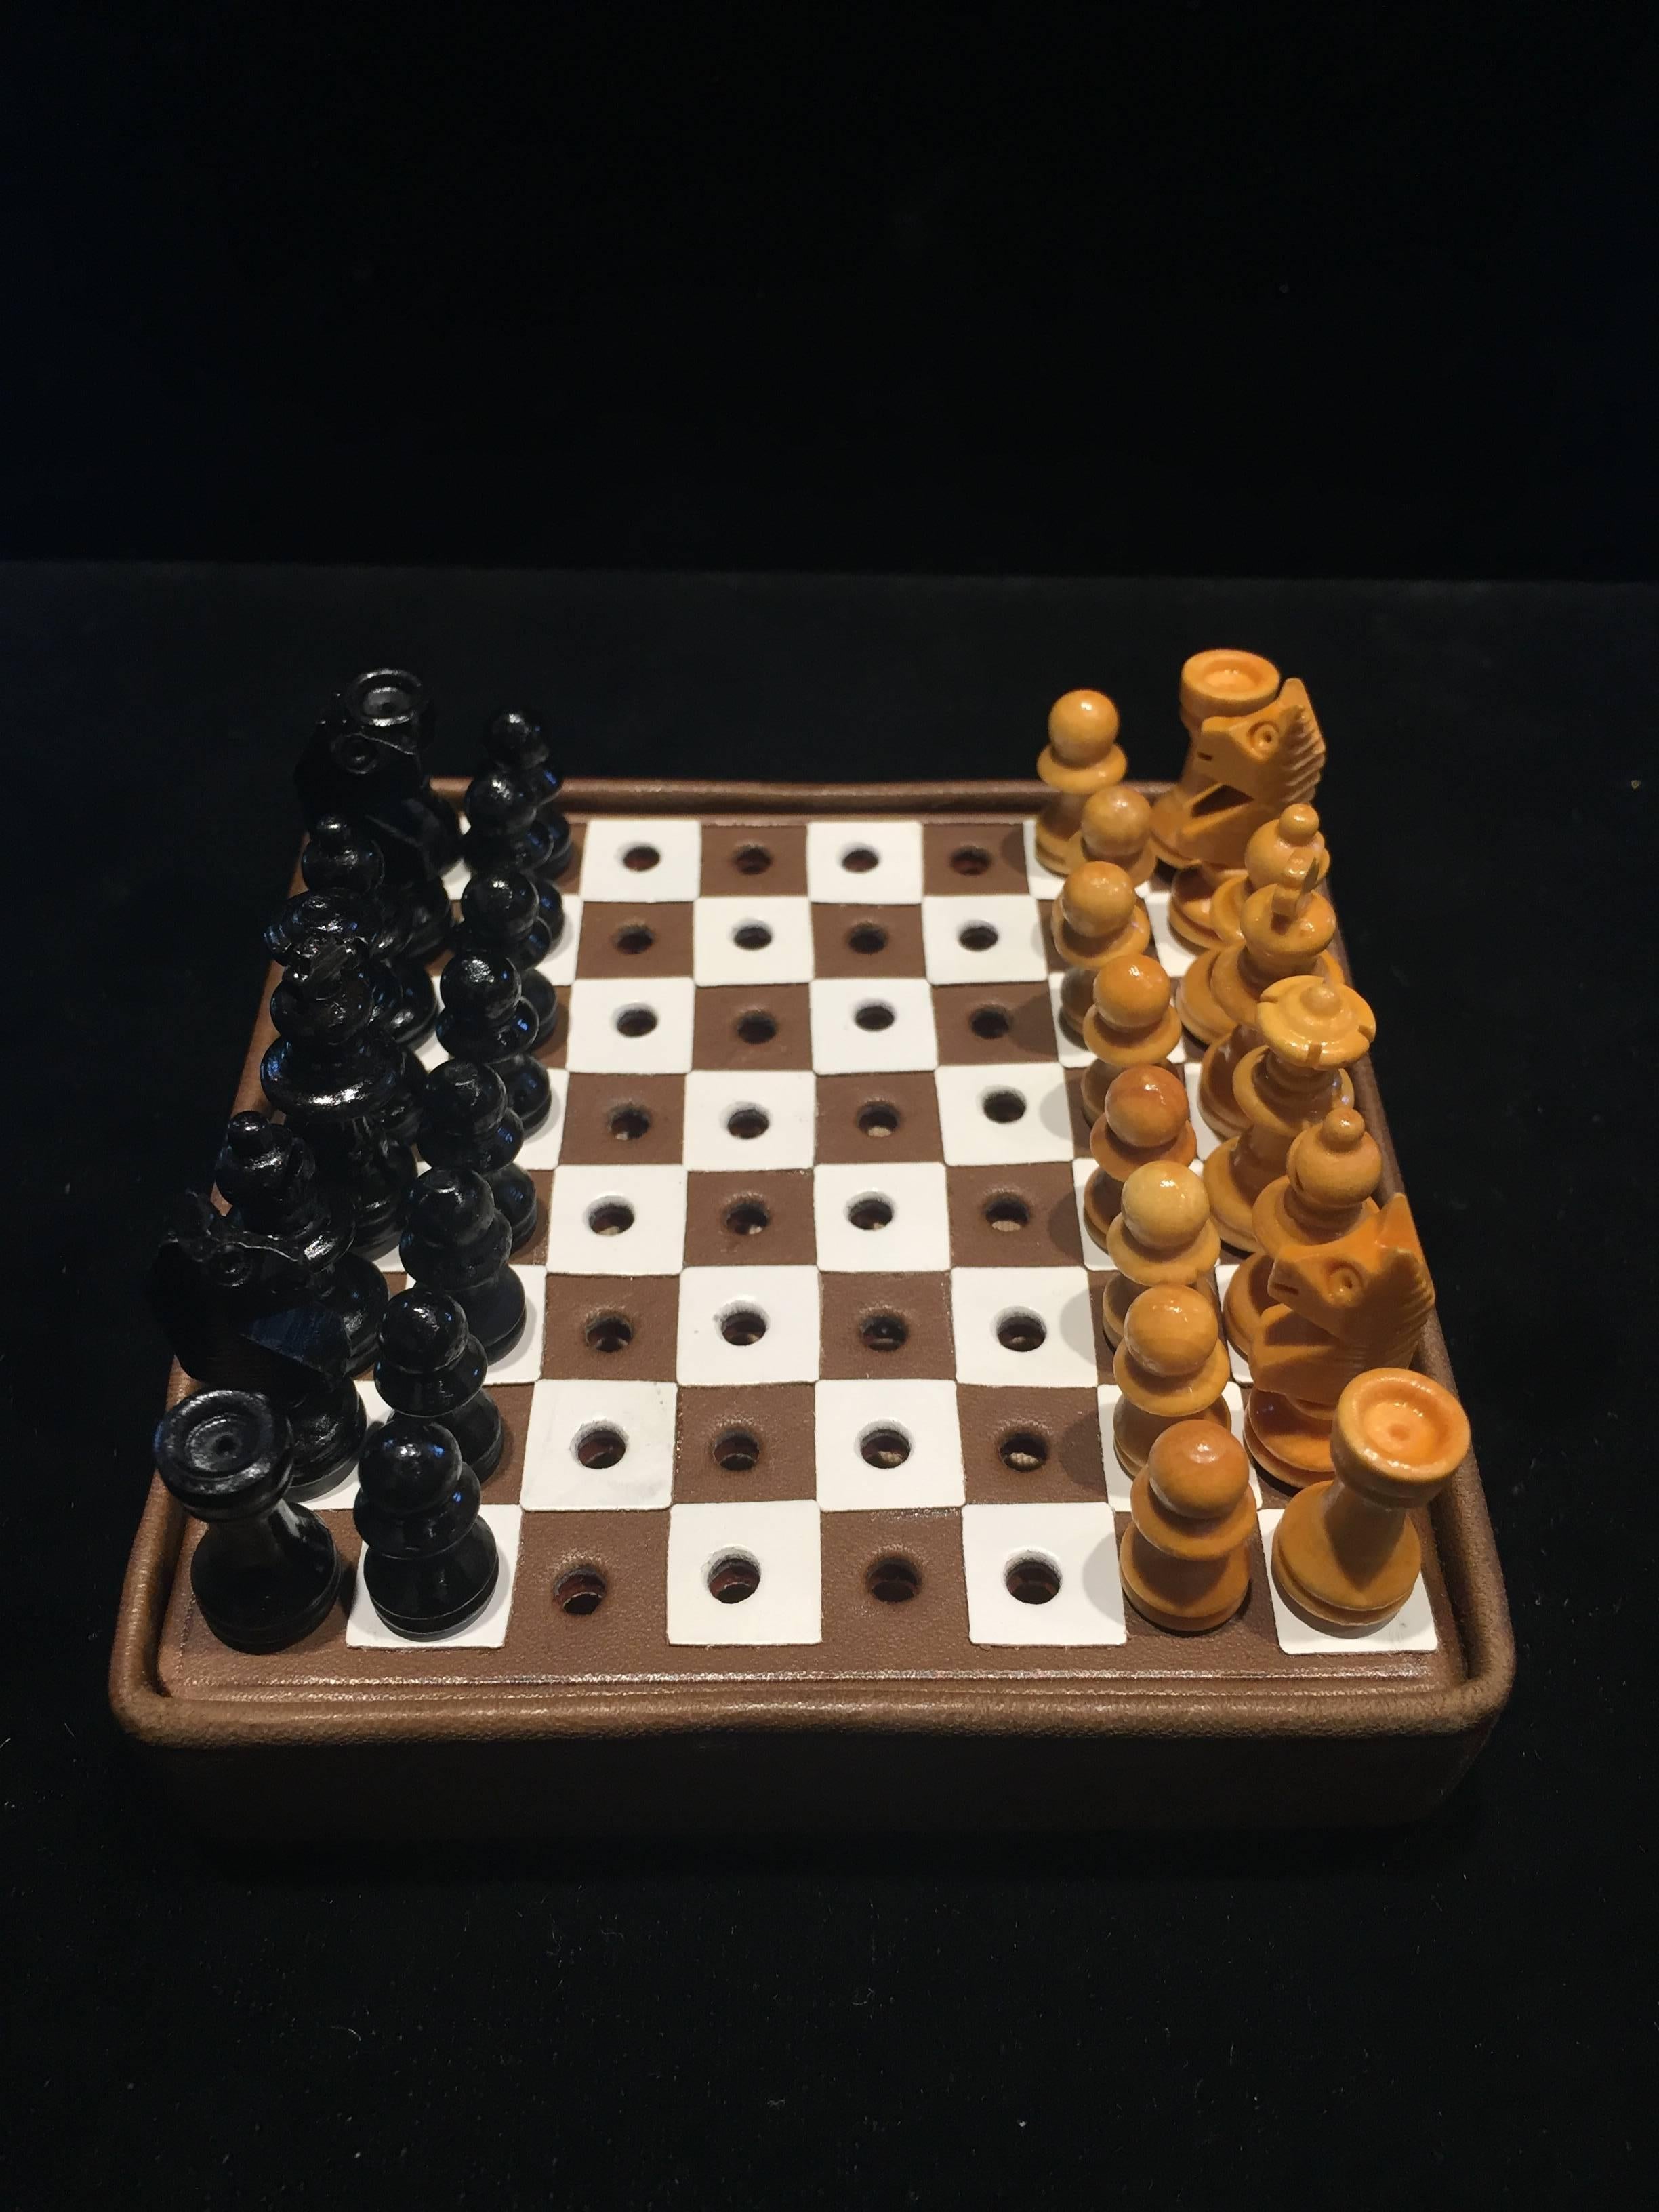 Mark cross leather and wood travel chess set, made for mark cross Spain, all original box and packaging, great men's gift. The closed size is 4